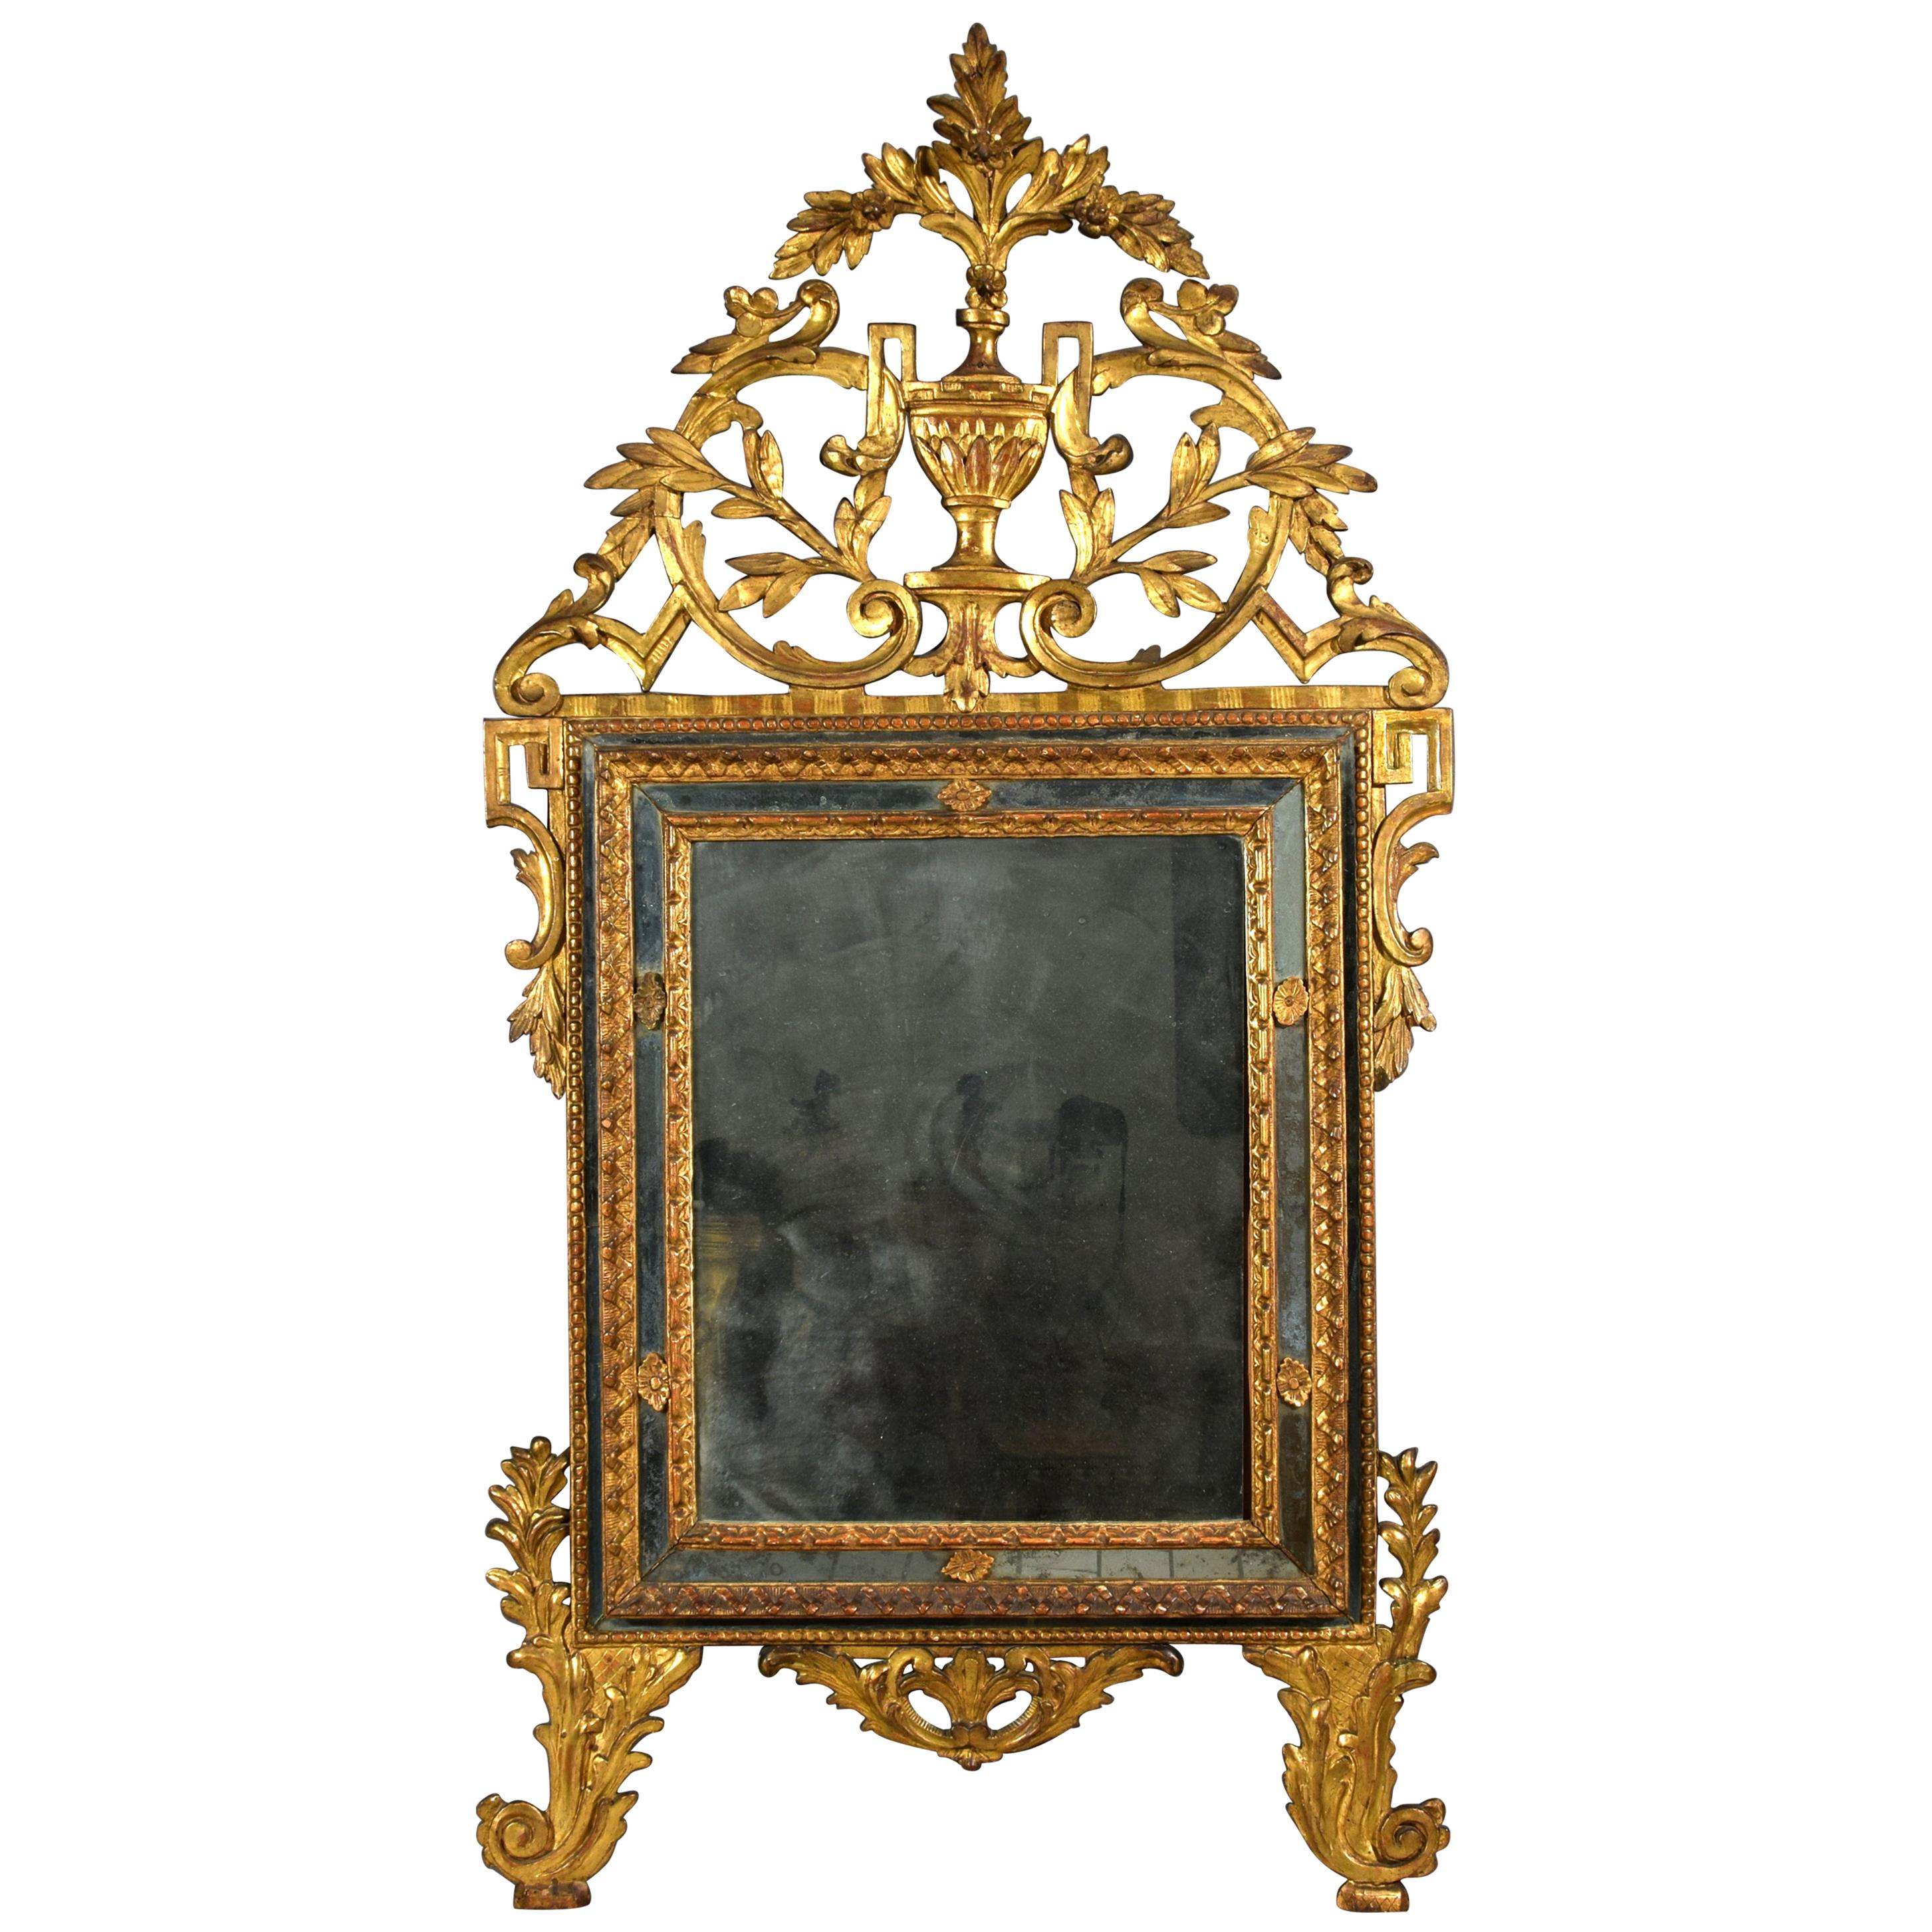 18th Century Italian Carved and Gilded Wood Mirror